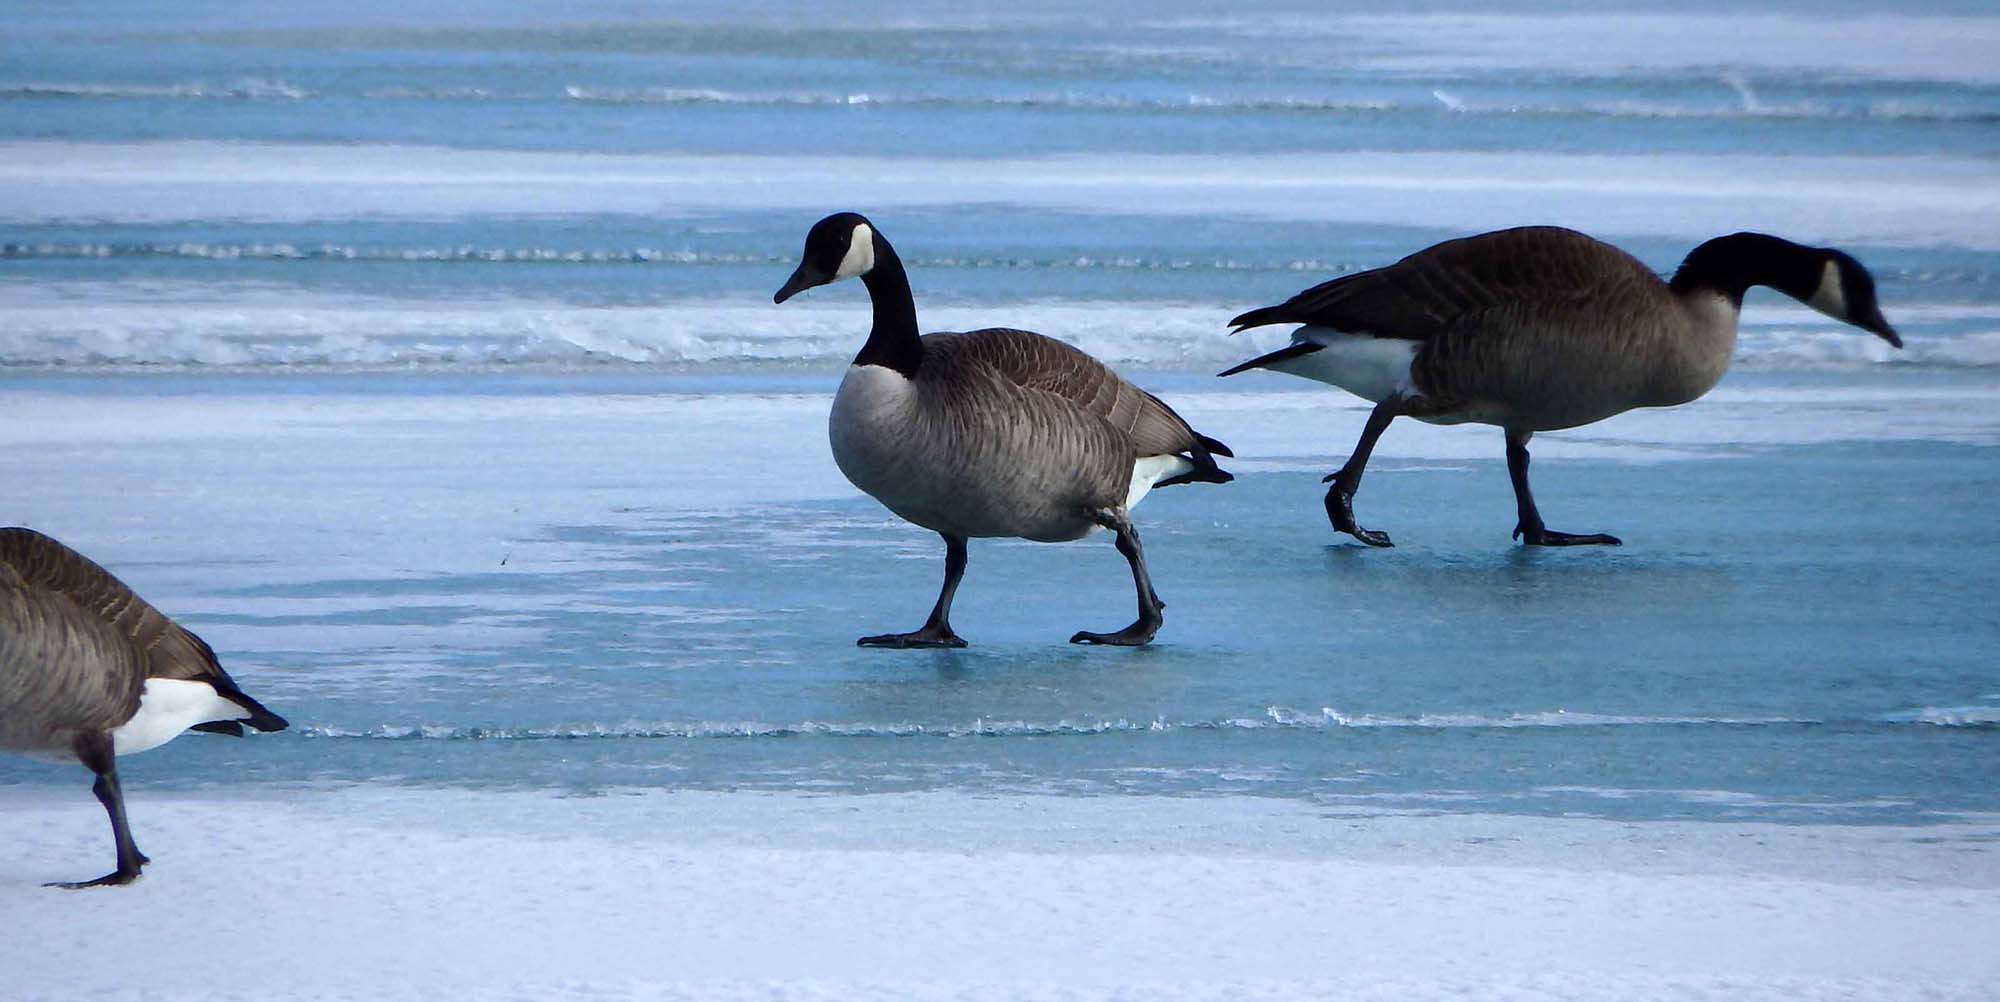 Geese on Chicago's lakefront in winter